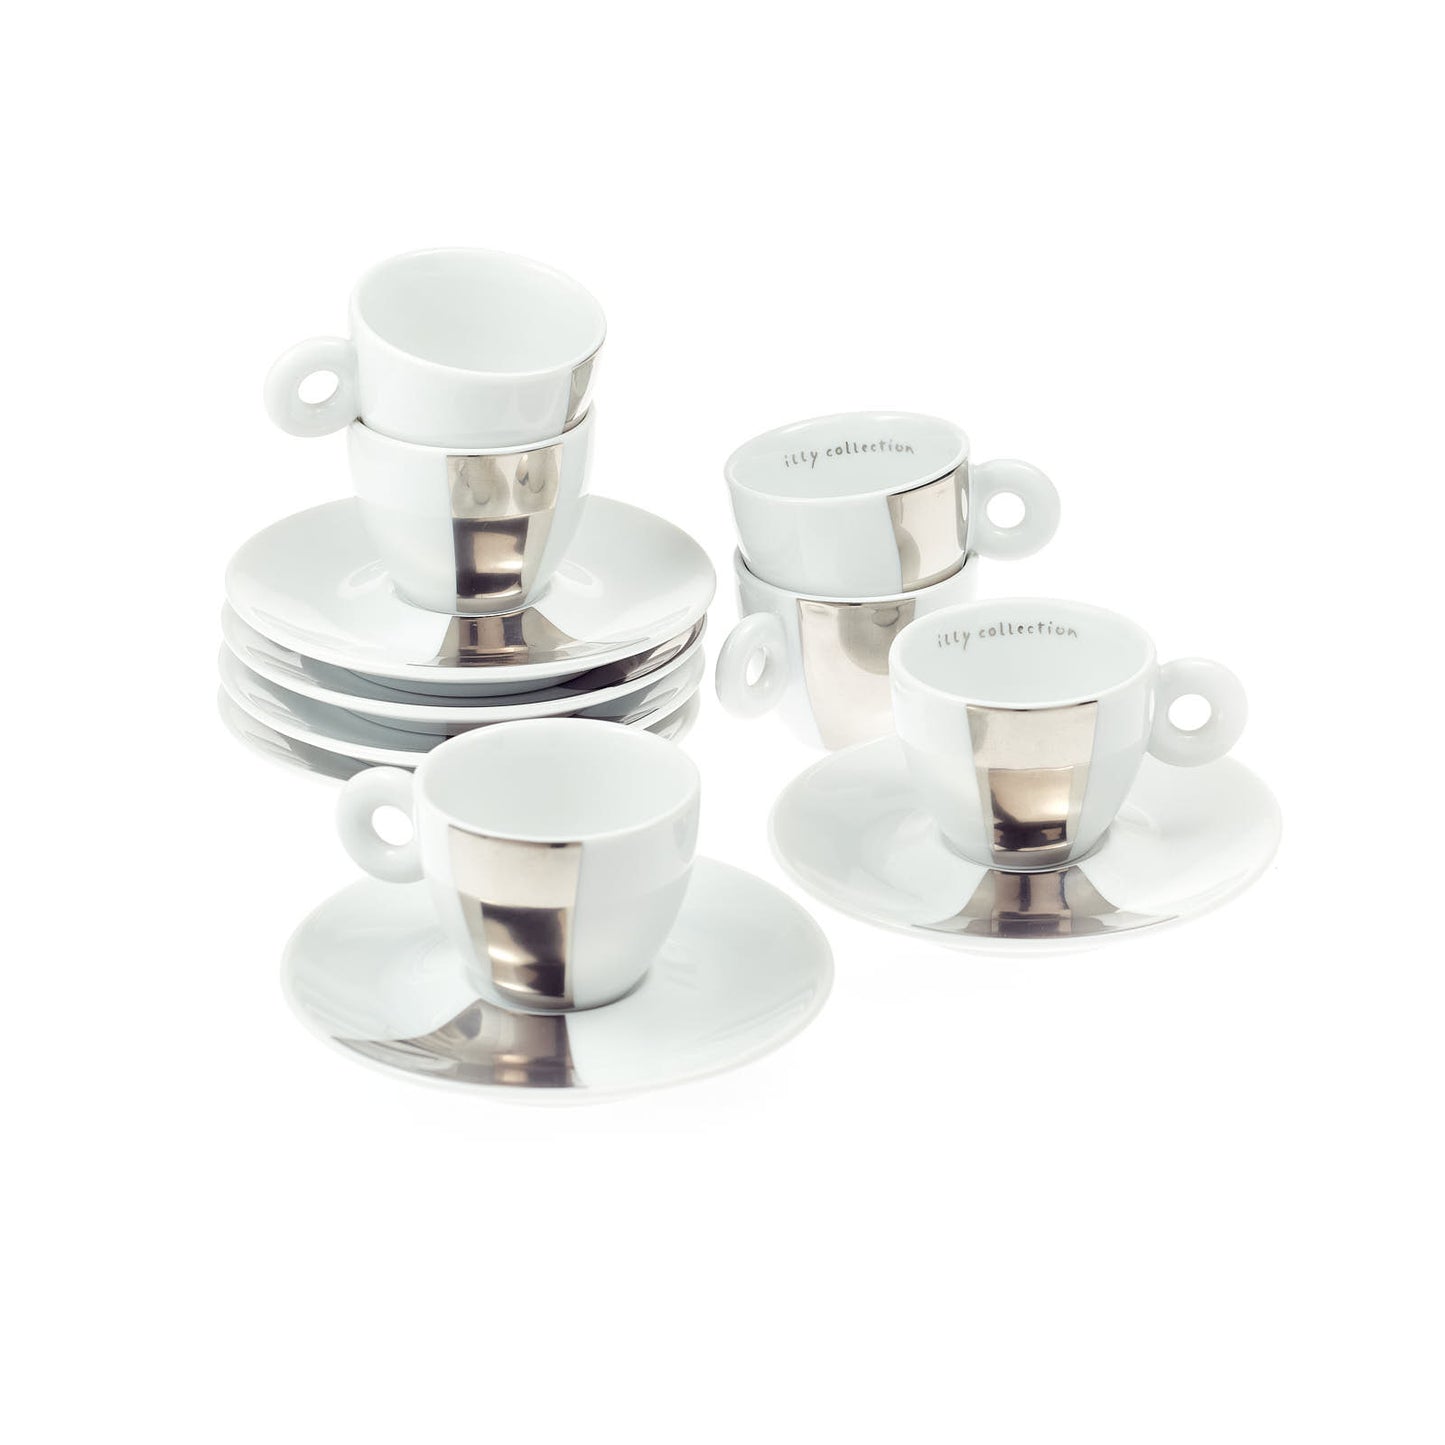 Set 6 coffee cups (designed by Michelangelo Pistoletto)